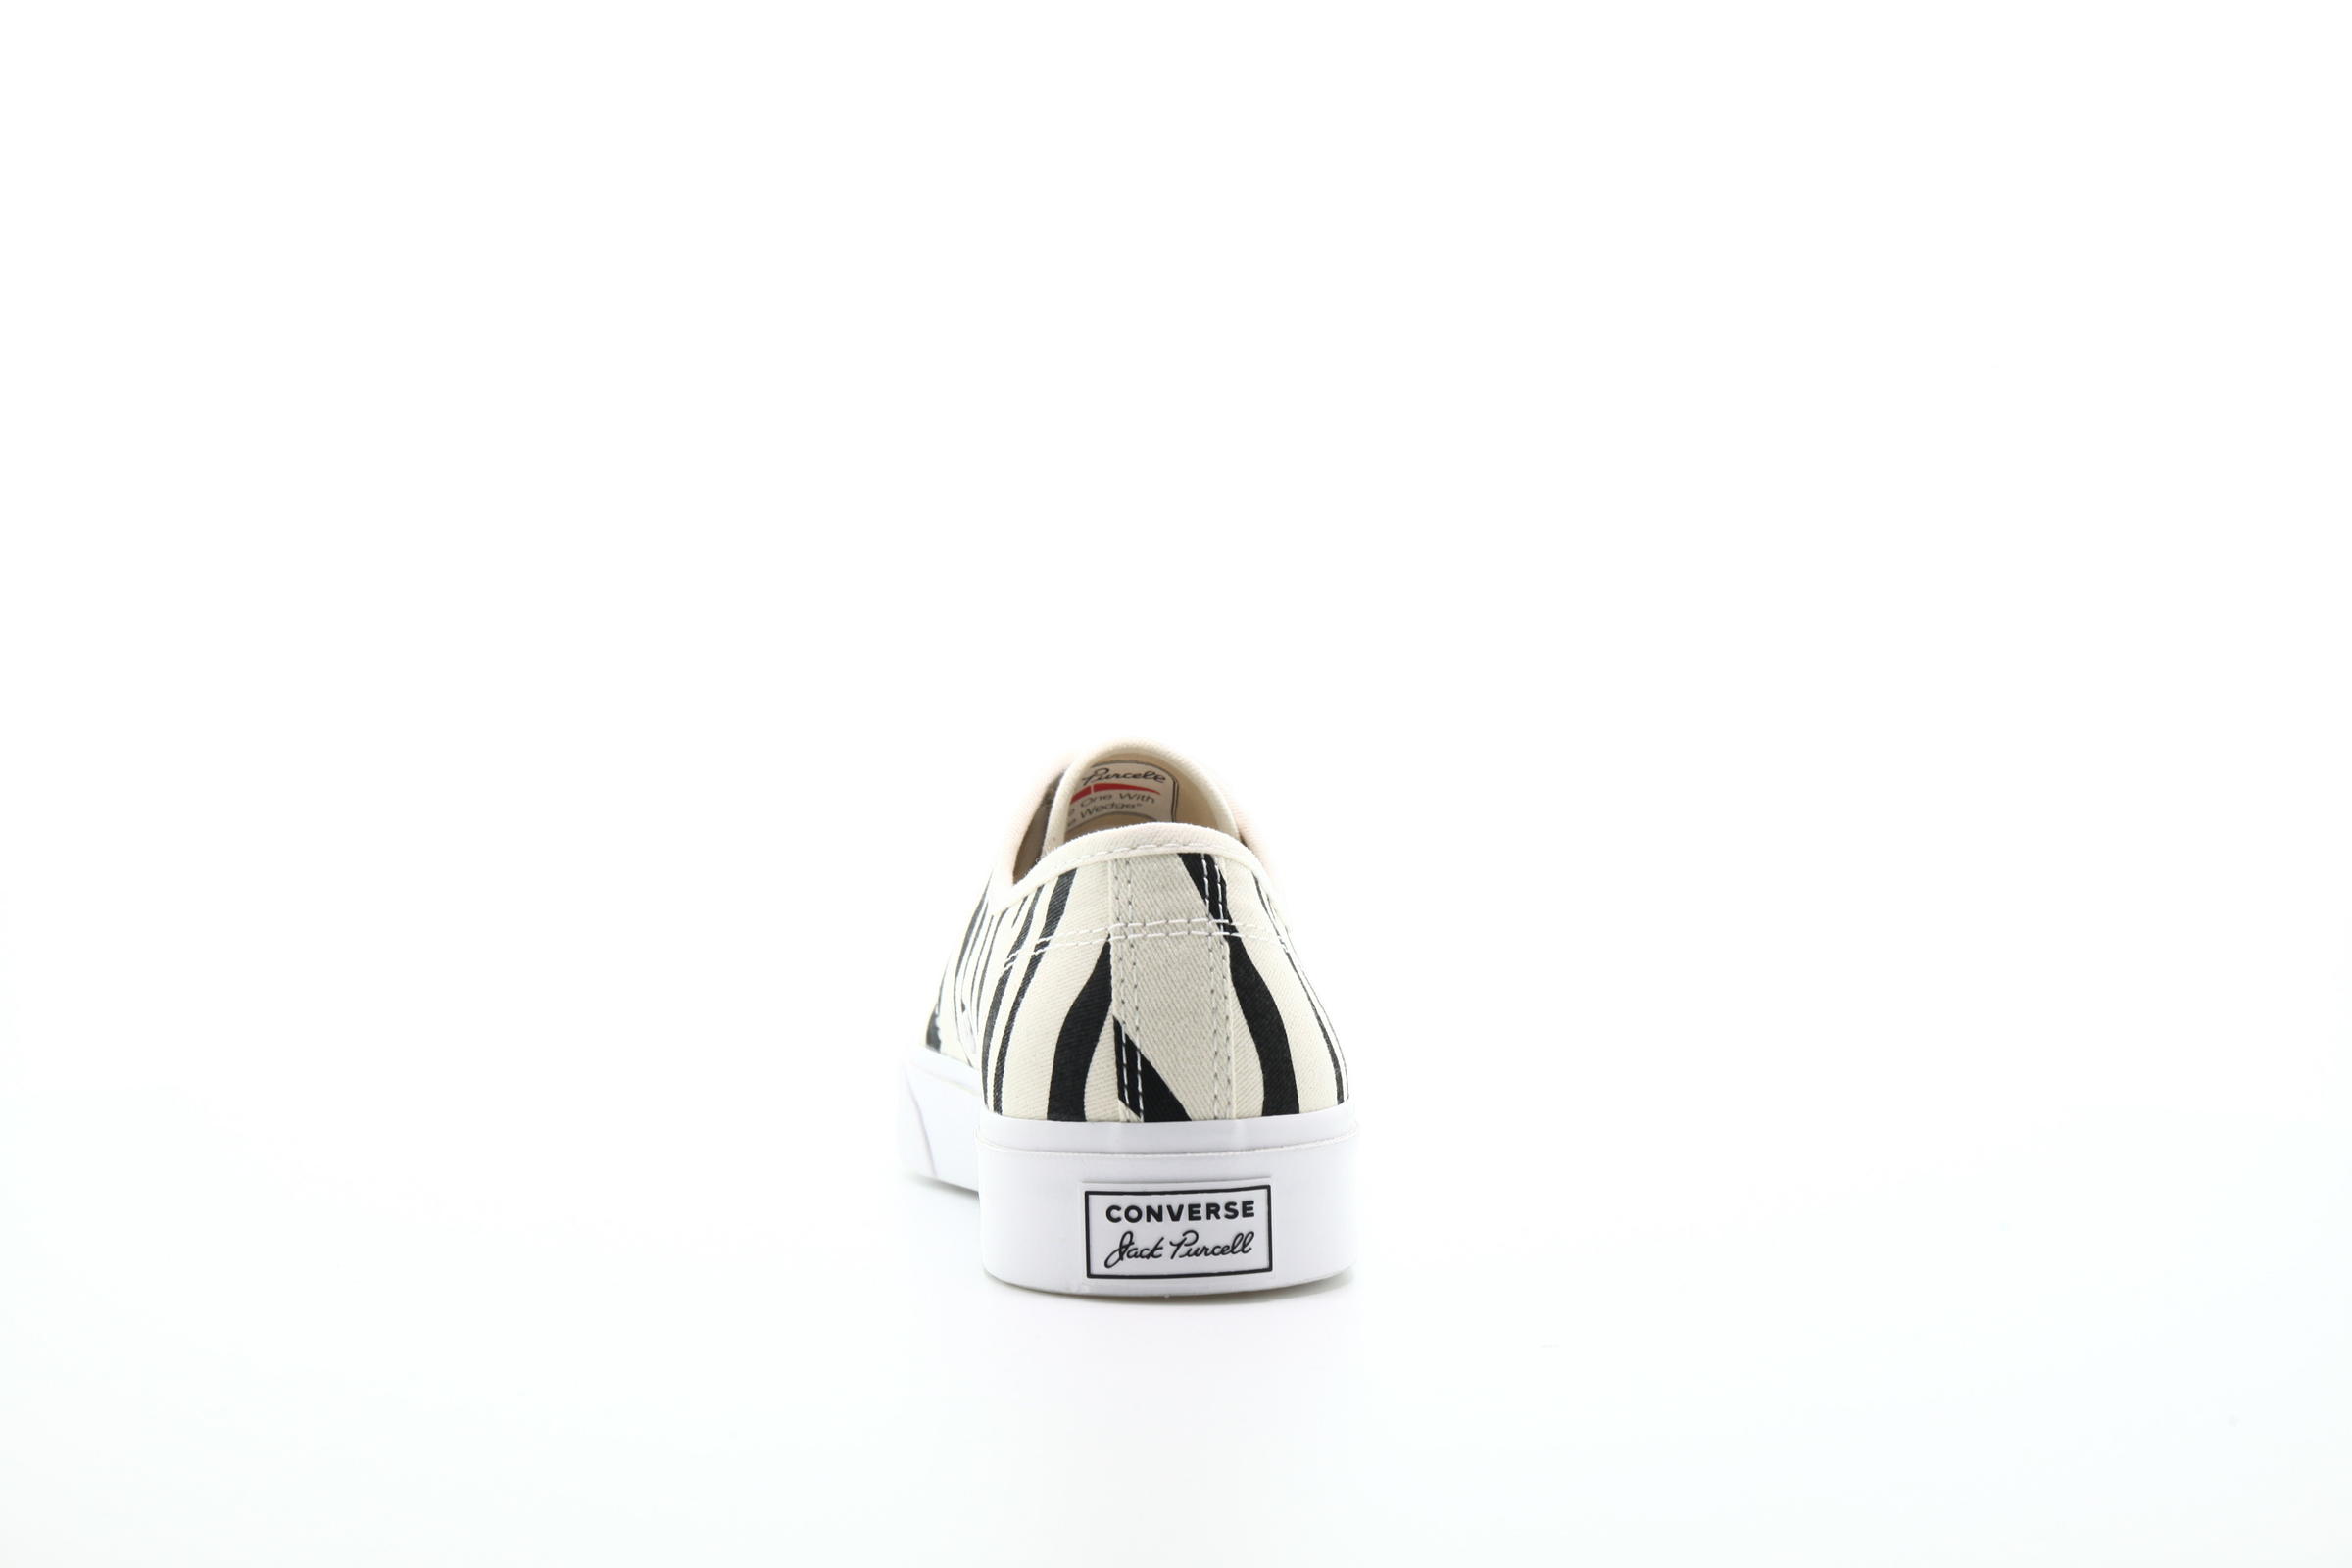 Converse Jack Purcell OX Archive Prints "Black"